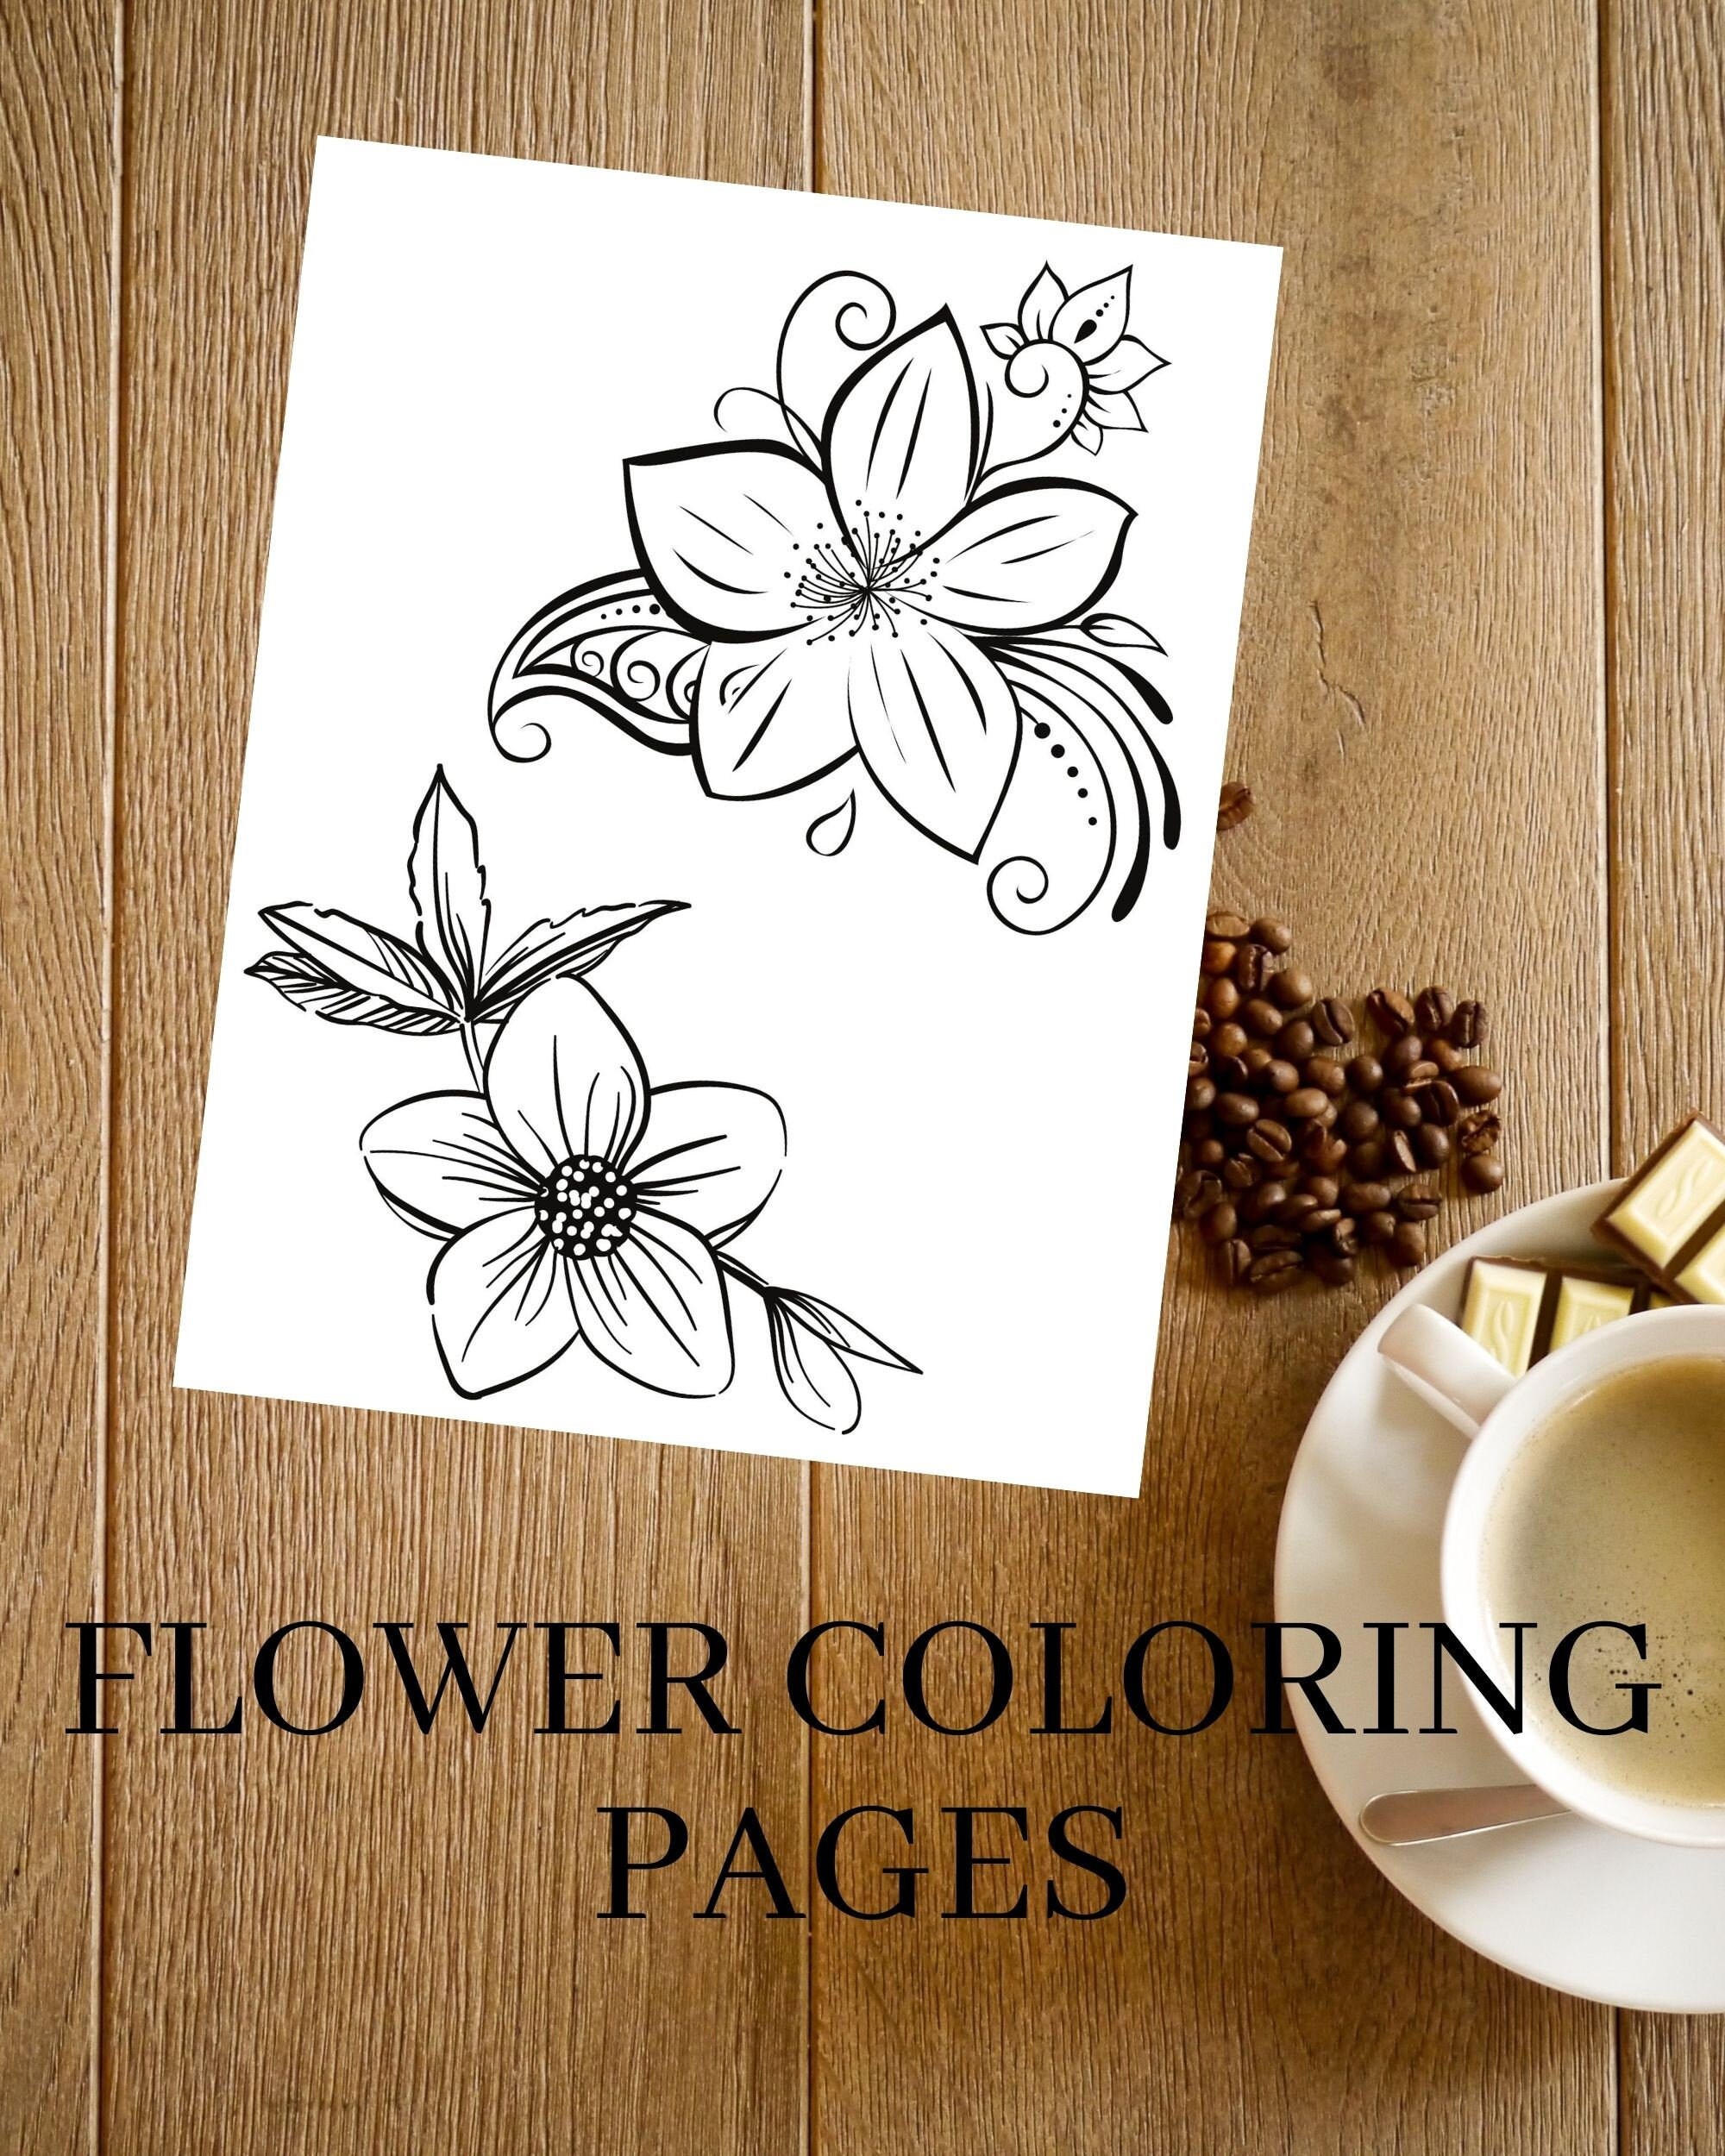 Flower Coloring Pages for Adults Printable, Adult Coloring Pages, Floral SIMPLE  Coloring Book for Adults, Digital Coloring at Home Activity 